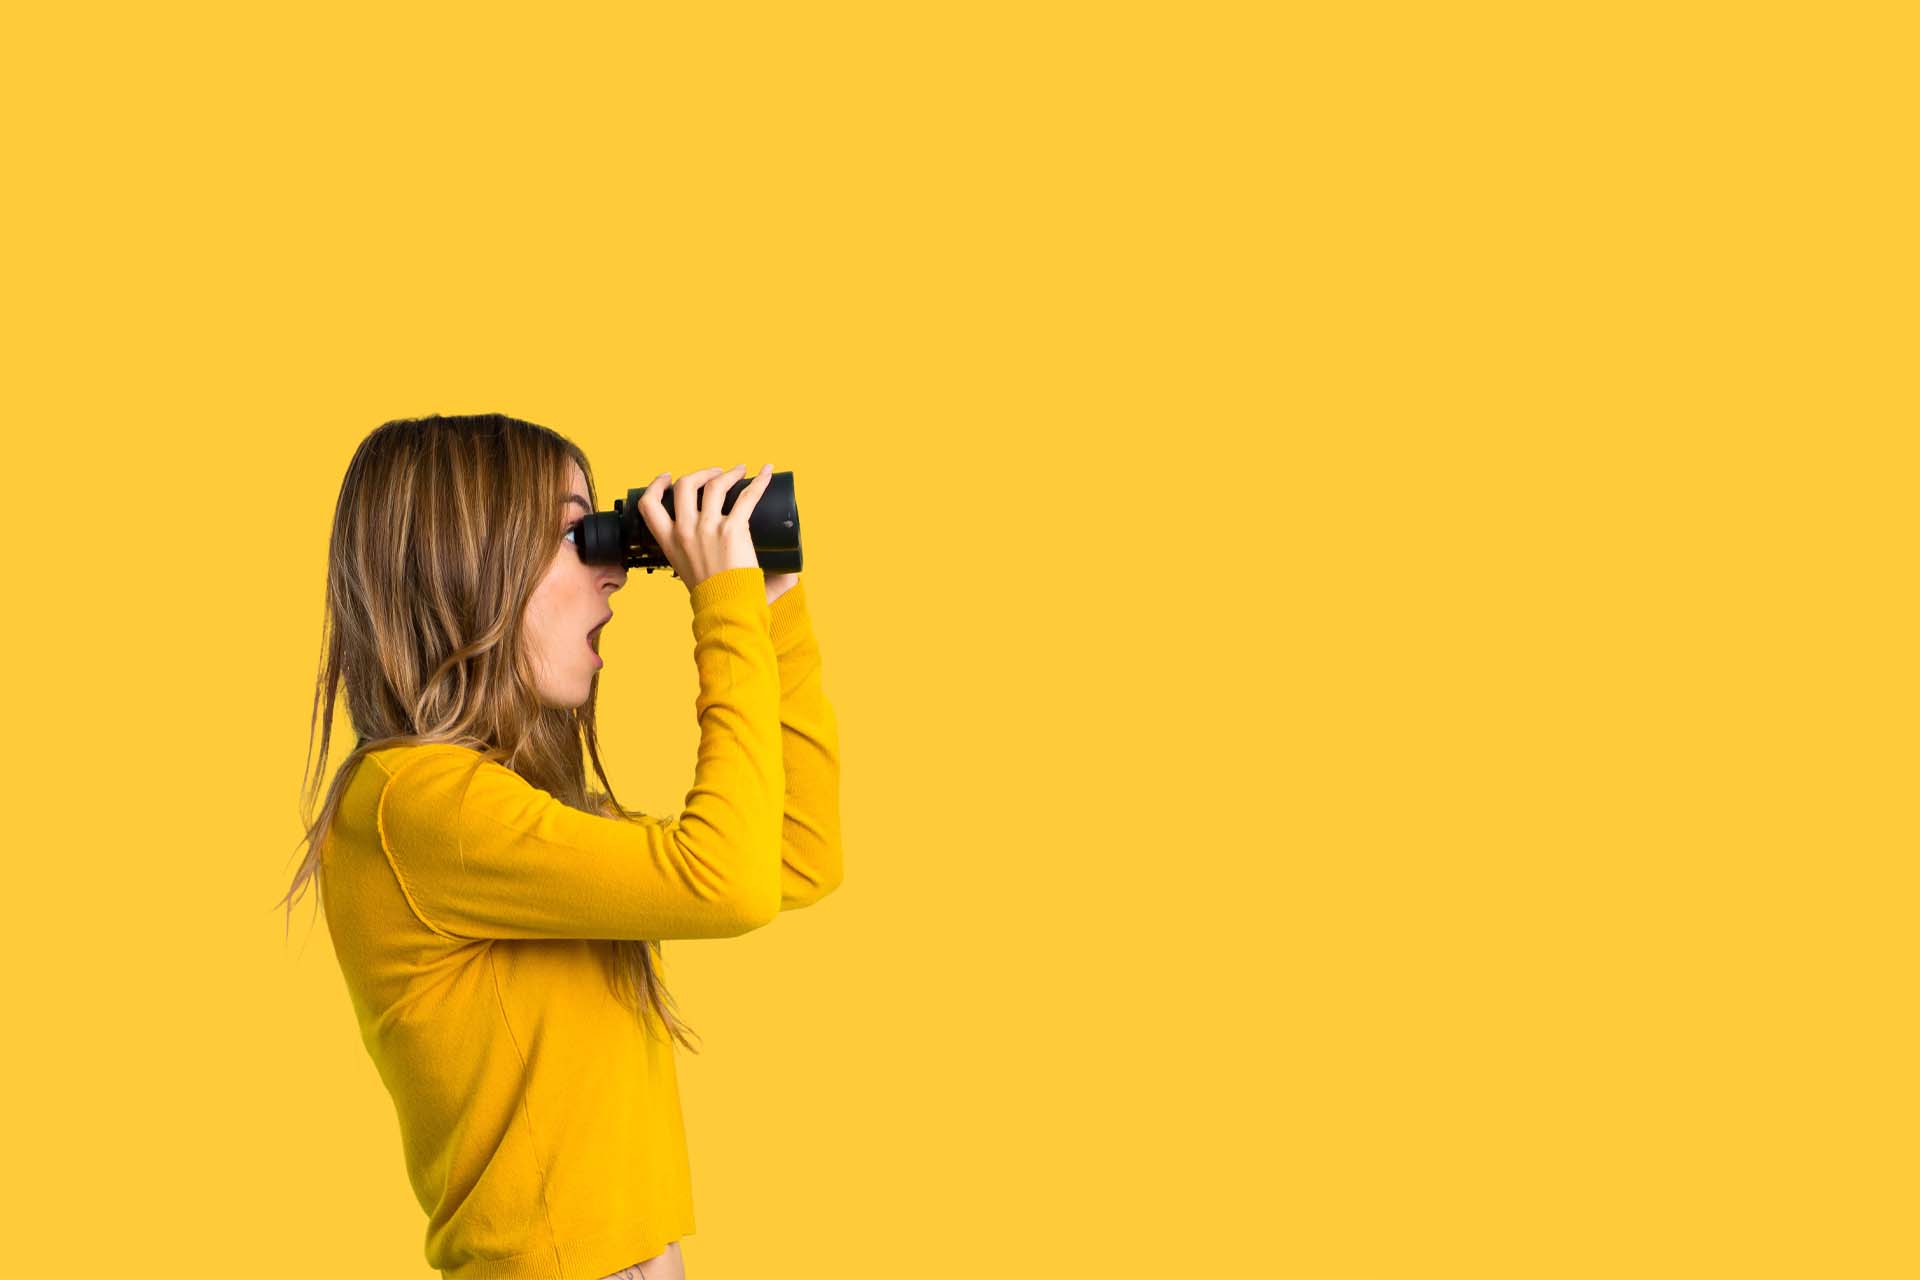 A girl in a yellow jumper looking through binoculars against a yellow background.